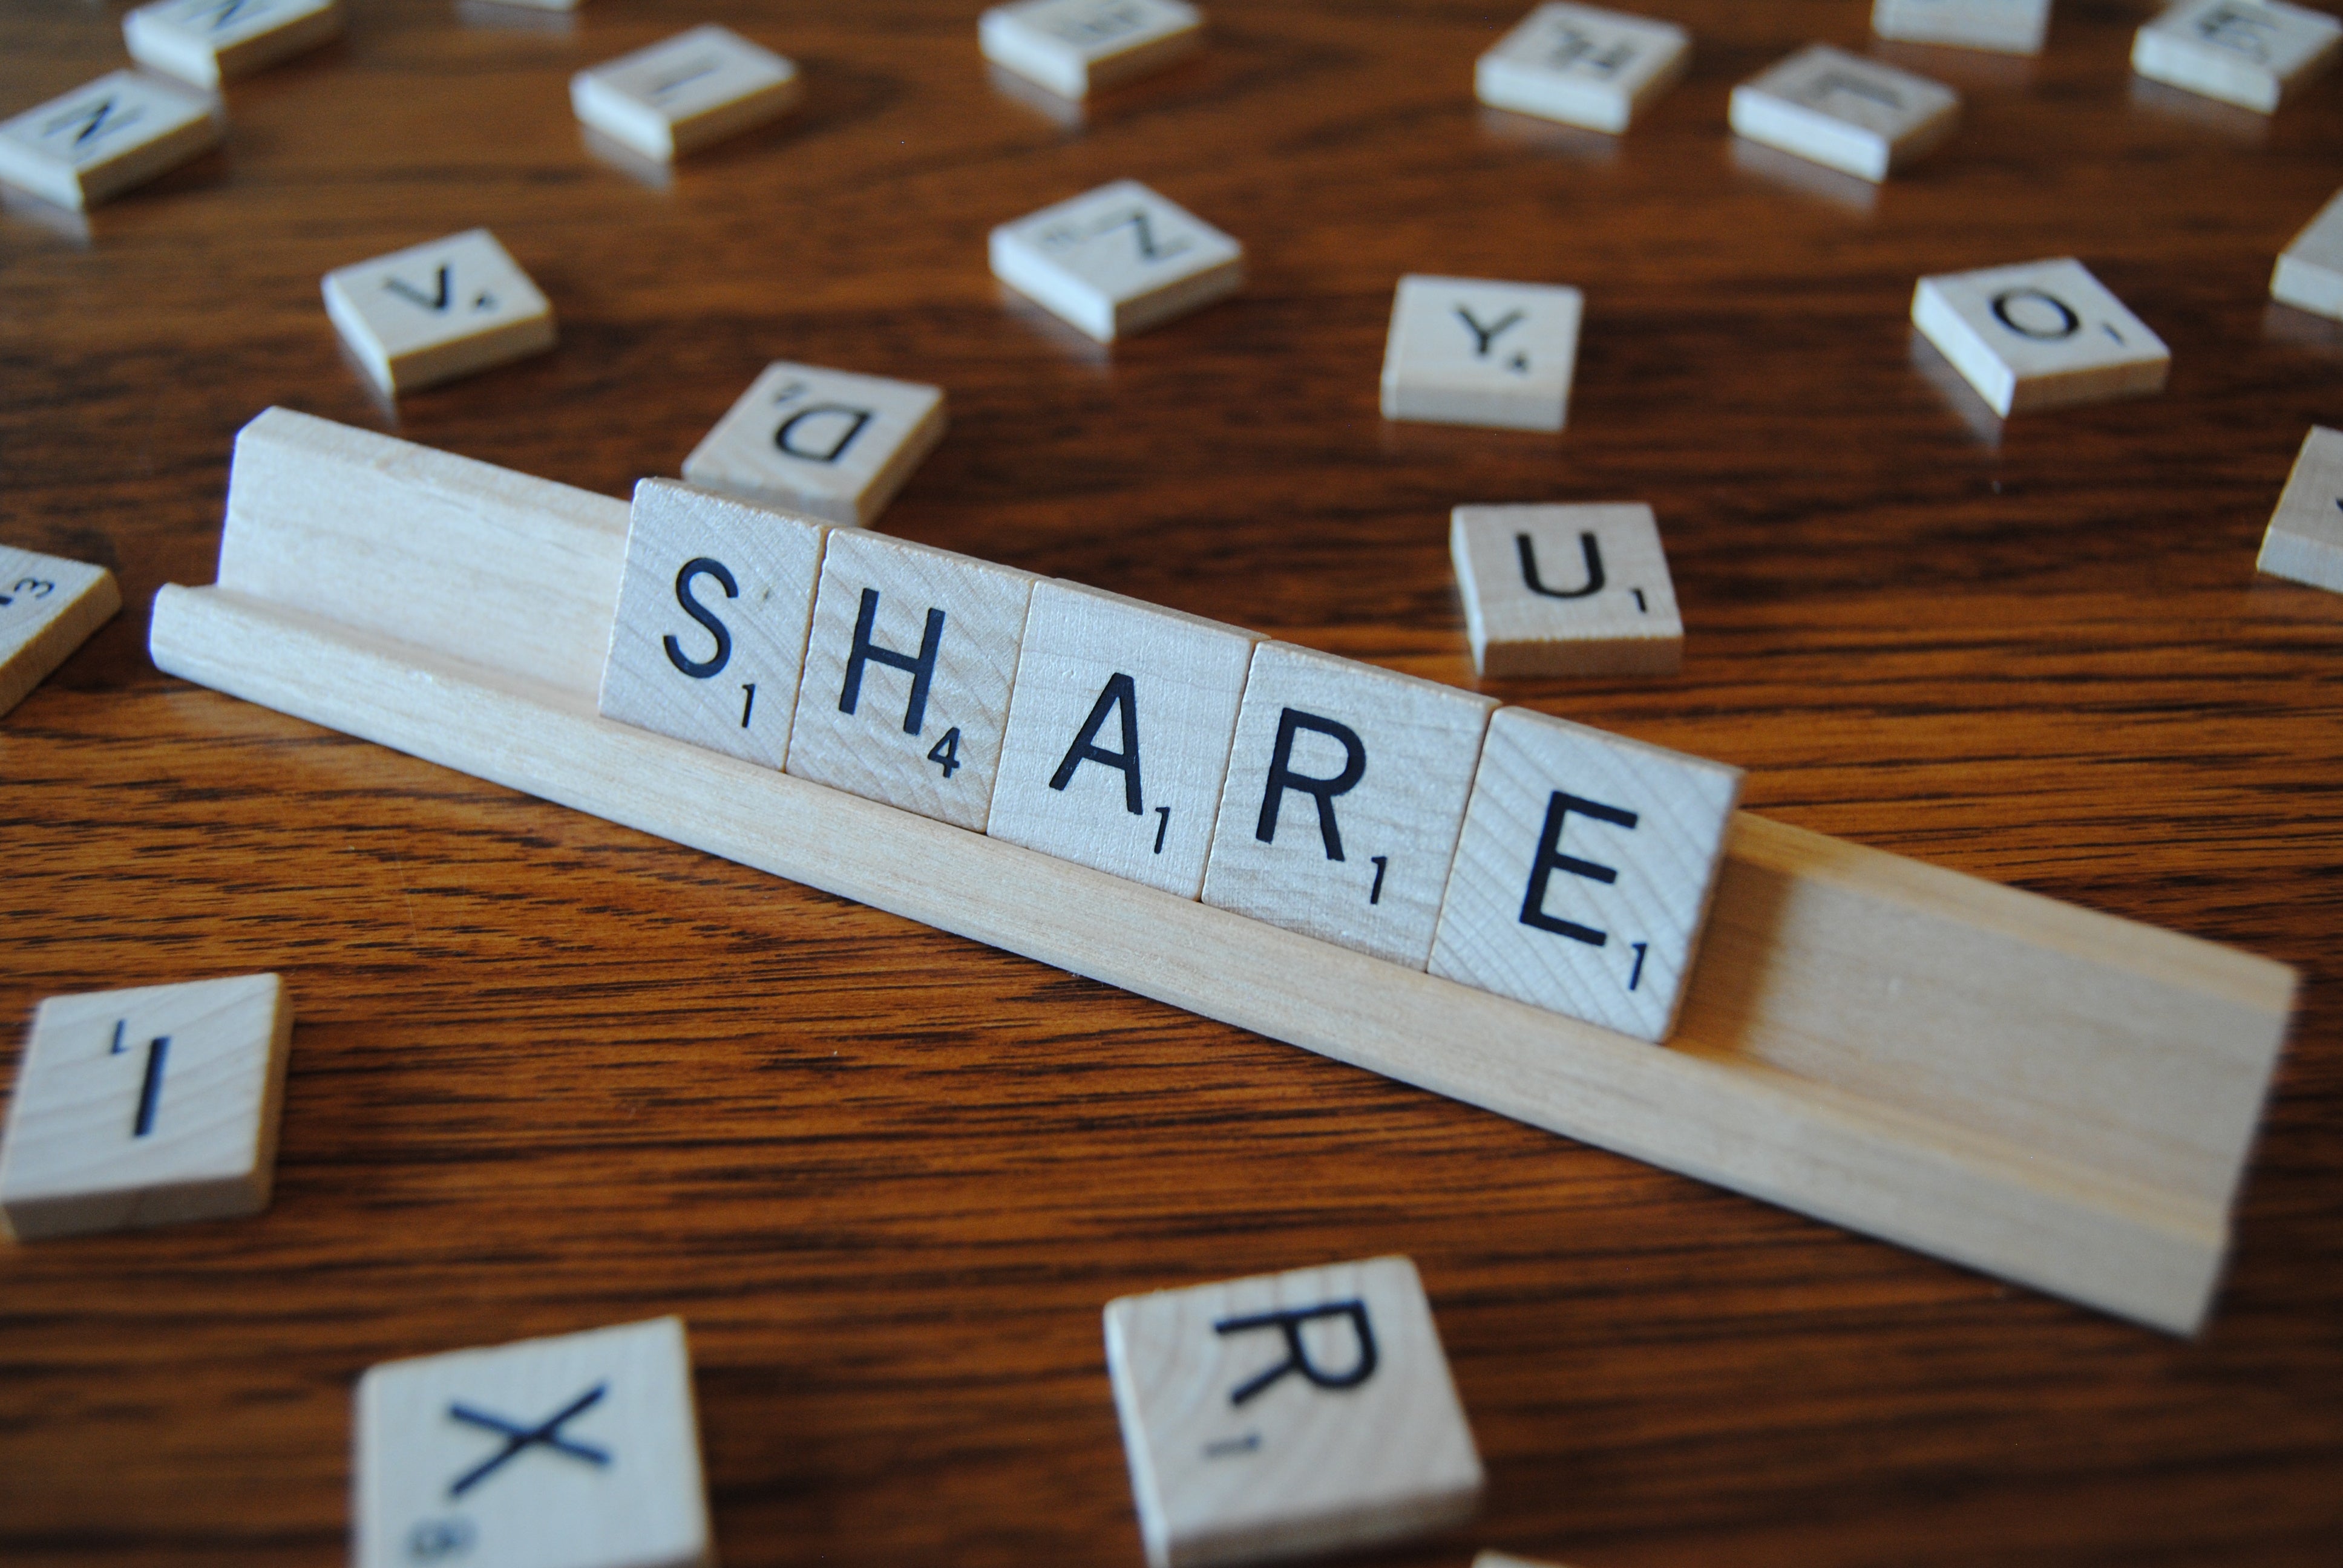 File-sharing technology goes mainstream